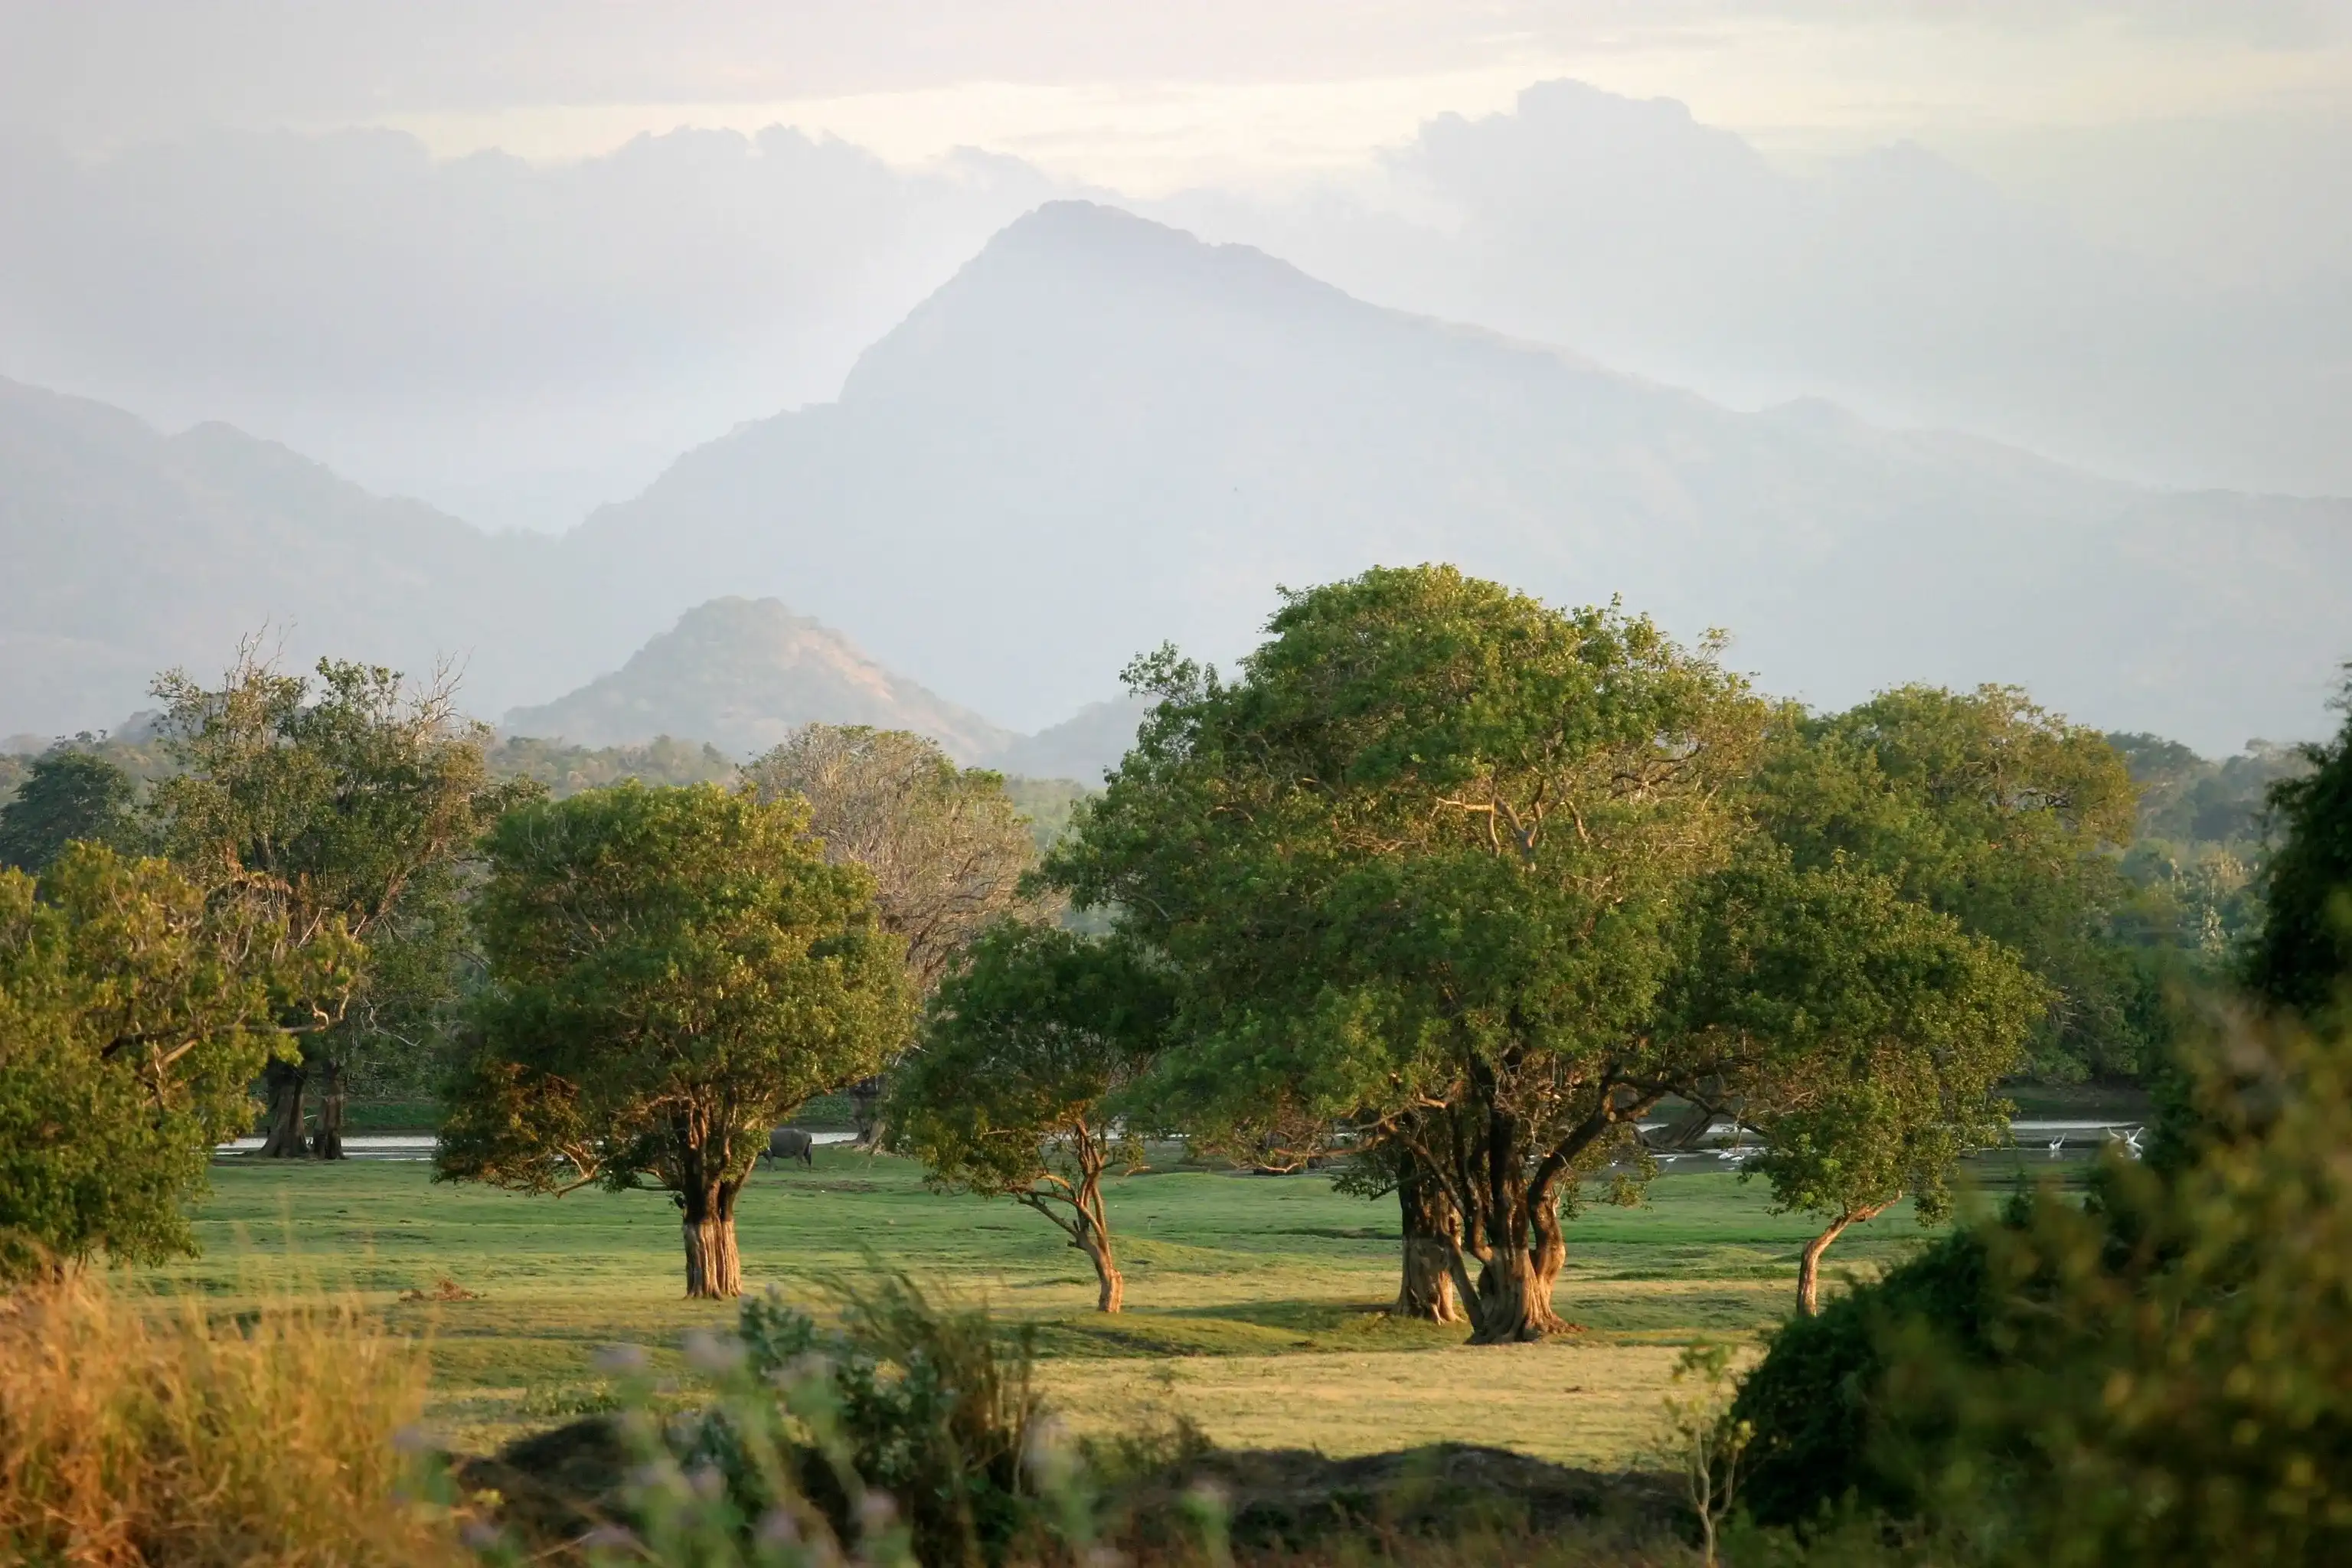 Trees growing in an area known as The Elephant Corridor, with the Kandalama Hills in the background, North Central Province, Sri Lanka.